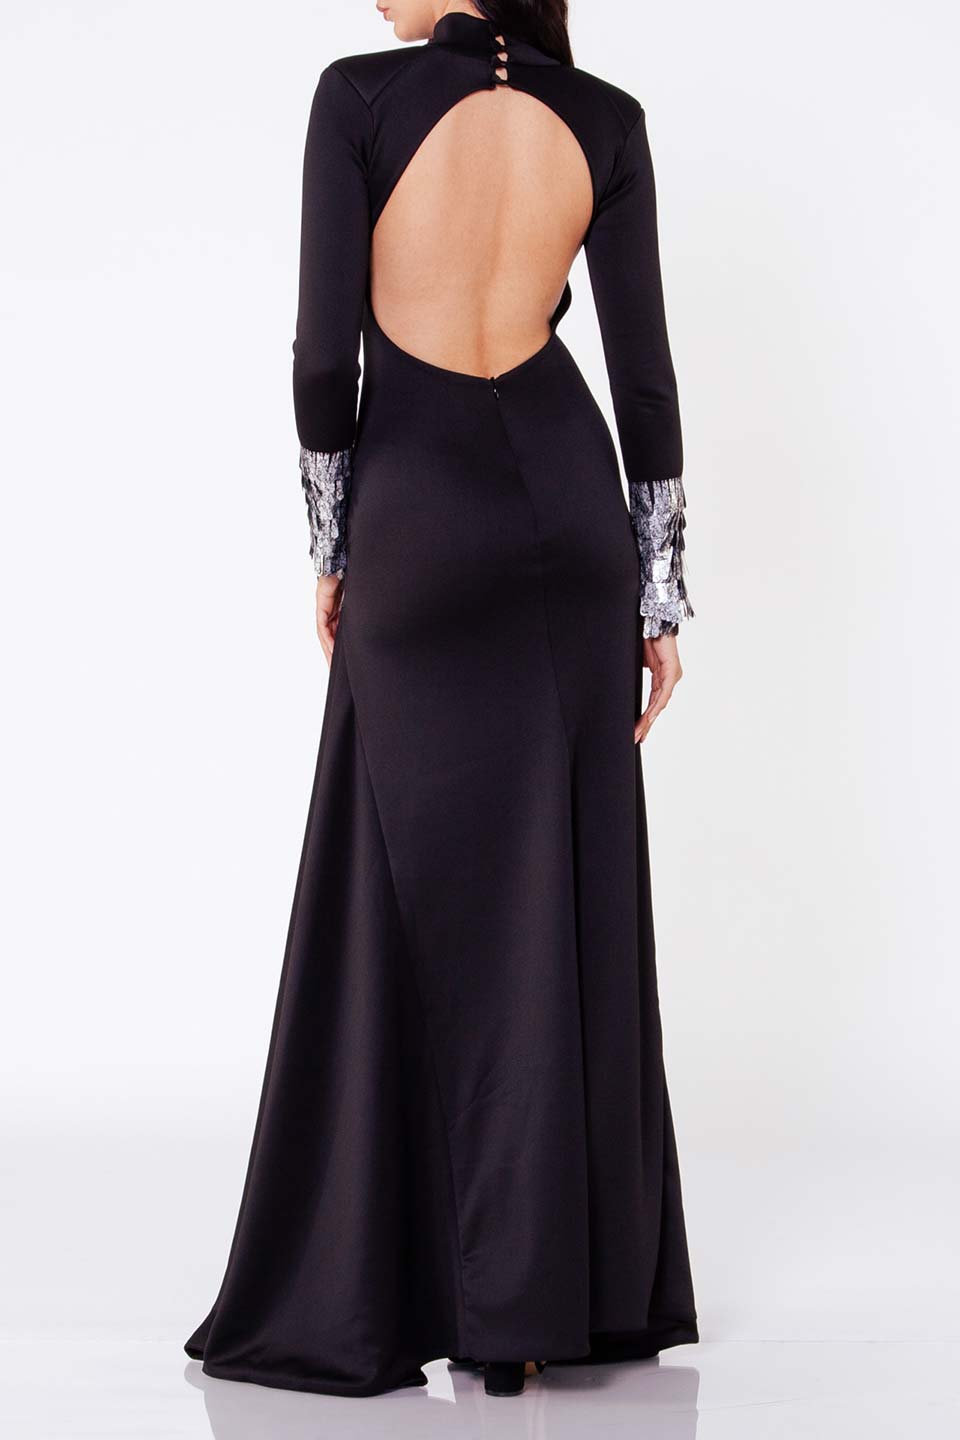 Fashion designer Maxi dress with open back and slits in front, special occasion dress